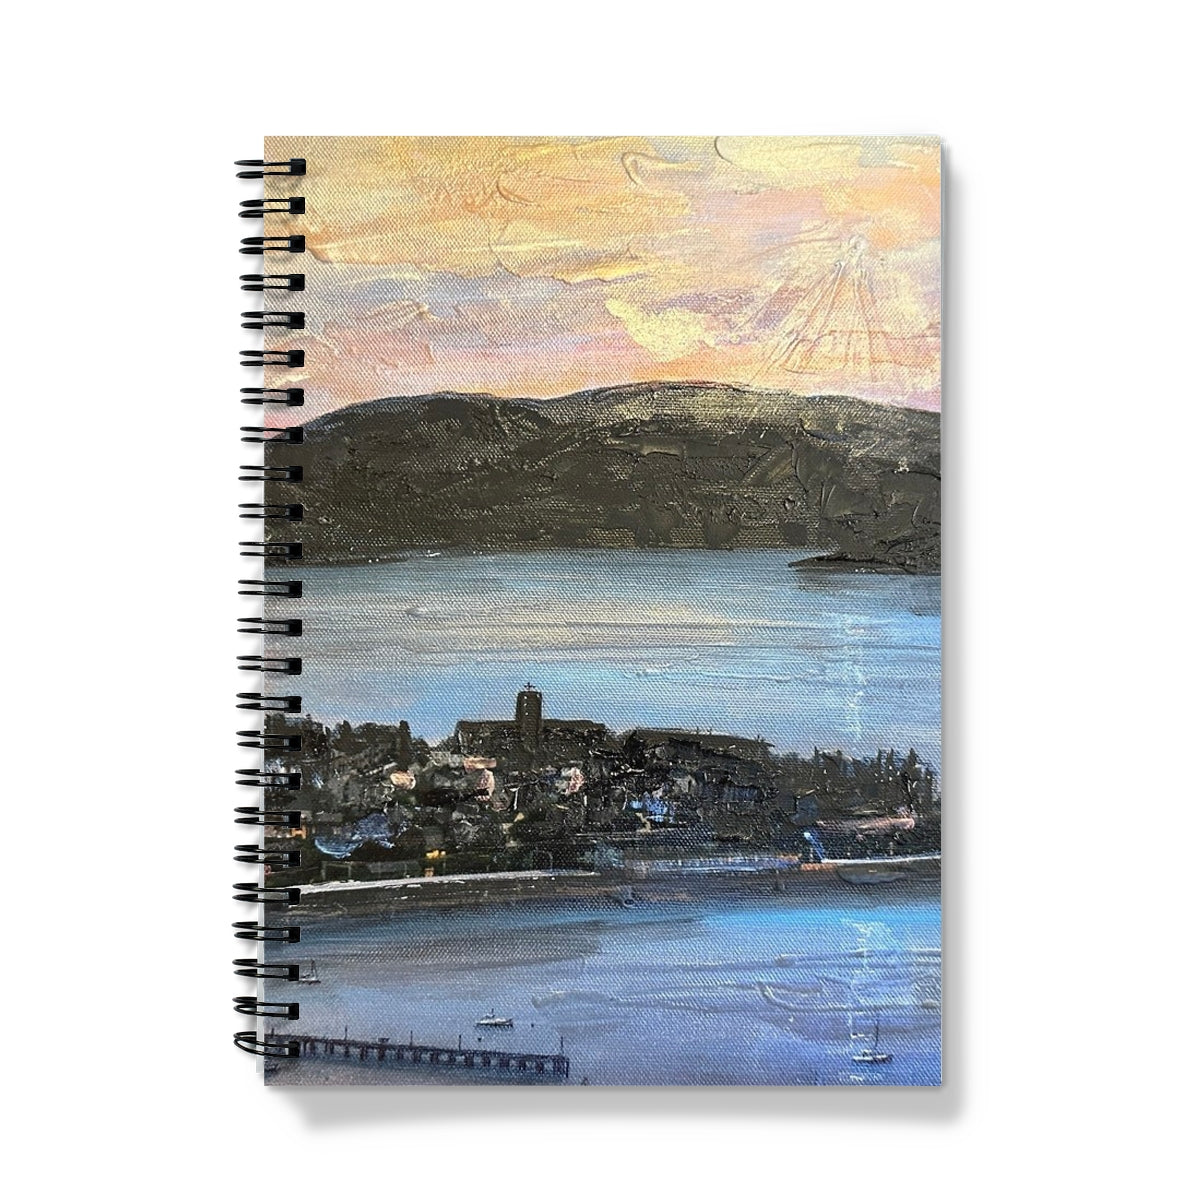 From Lyle Hill Art Gifts Notebook-Journals & Notebooks-River Clyde Art Gallery-A5-Graph-Paintings, Prints, Homeware, Art Gifts From Scotland By Scottish Artist Kevin Hunter